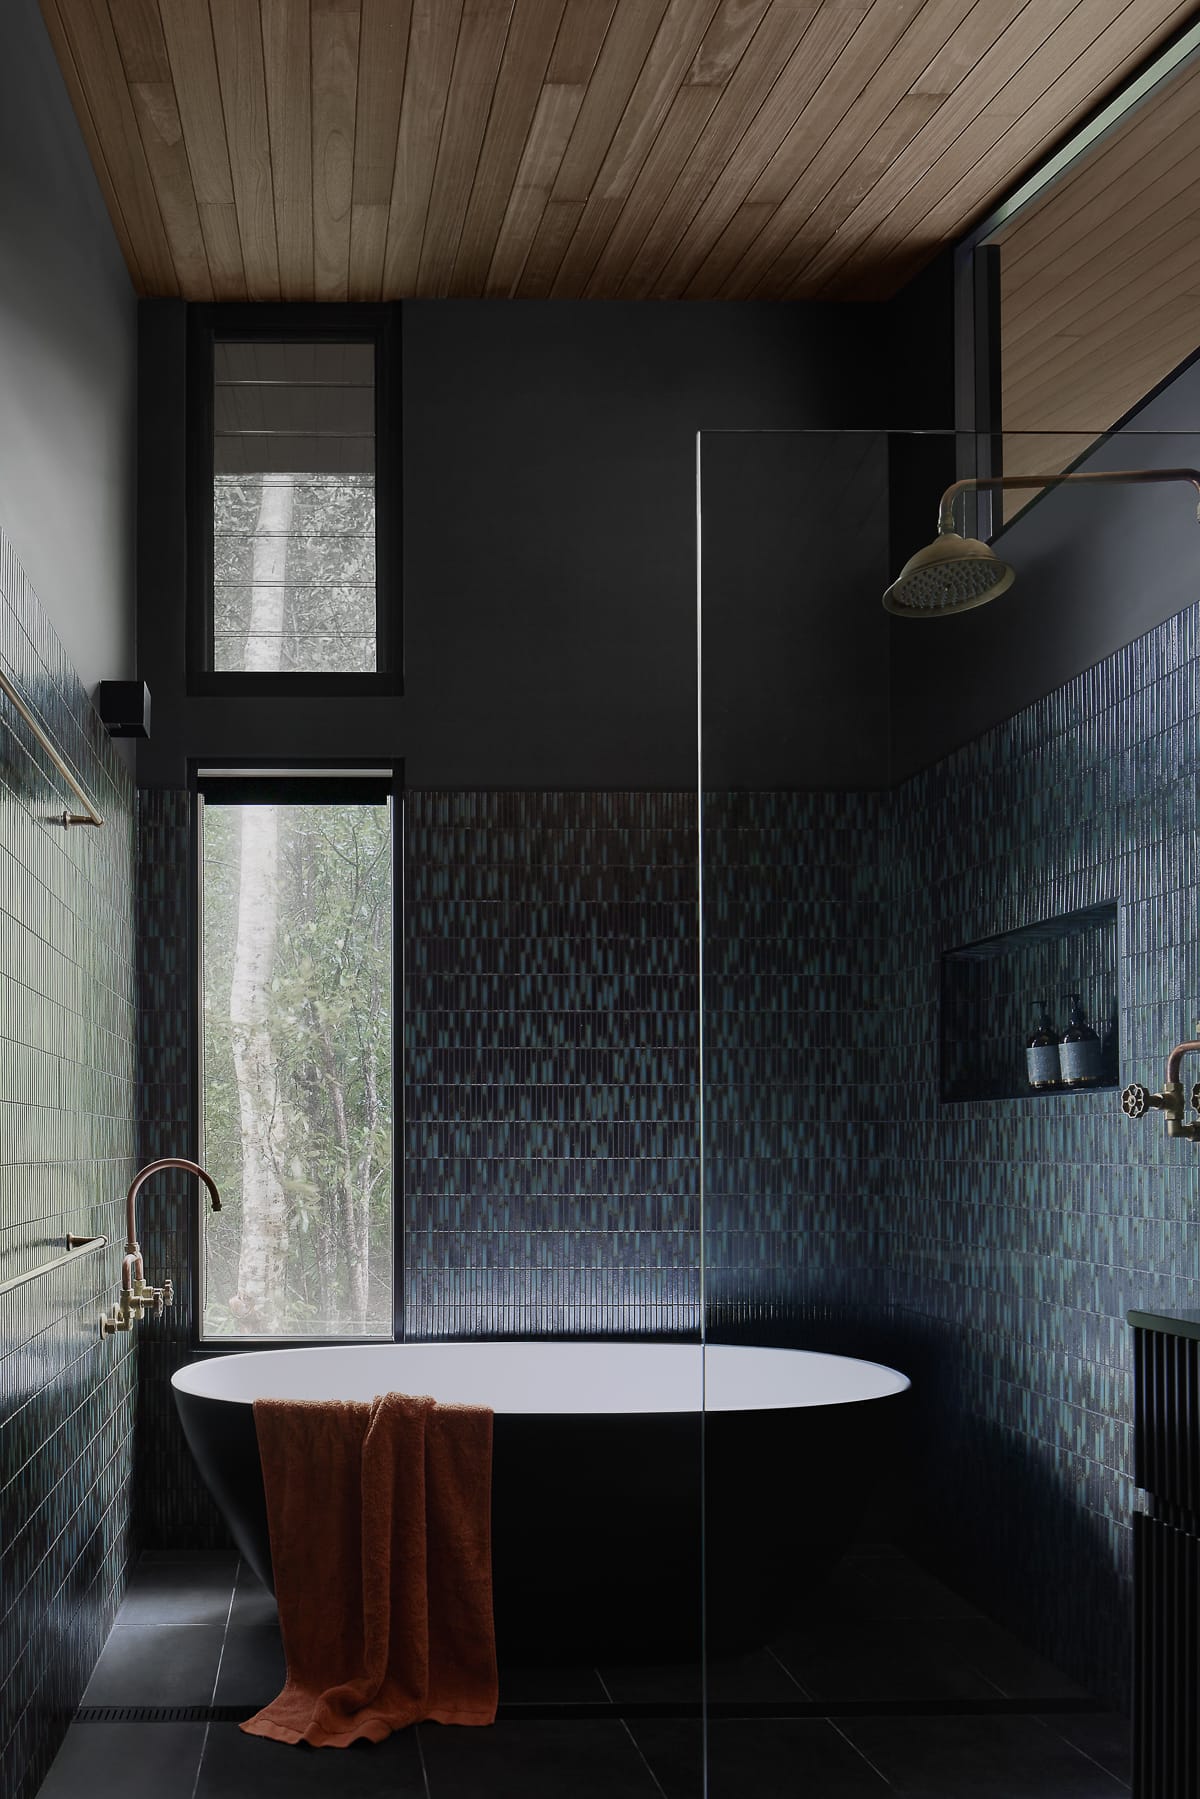 Cloudview Springbrook by Paul Uhlmann Architects. Photography by Brock Beazley. Bathroom with dark mosaic wall tiles and black floor tiles. Black, freestanding bathtub in centre of room.